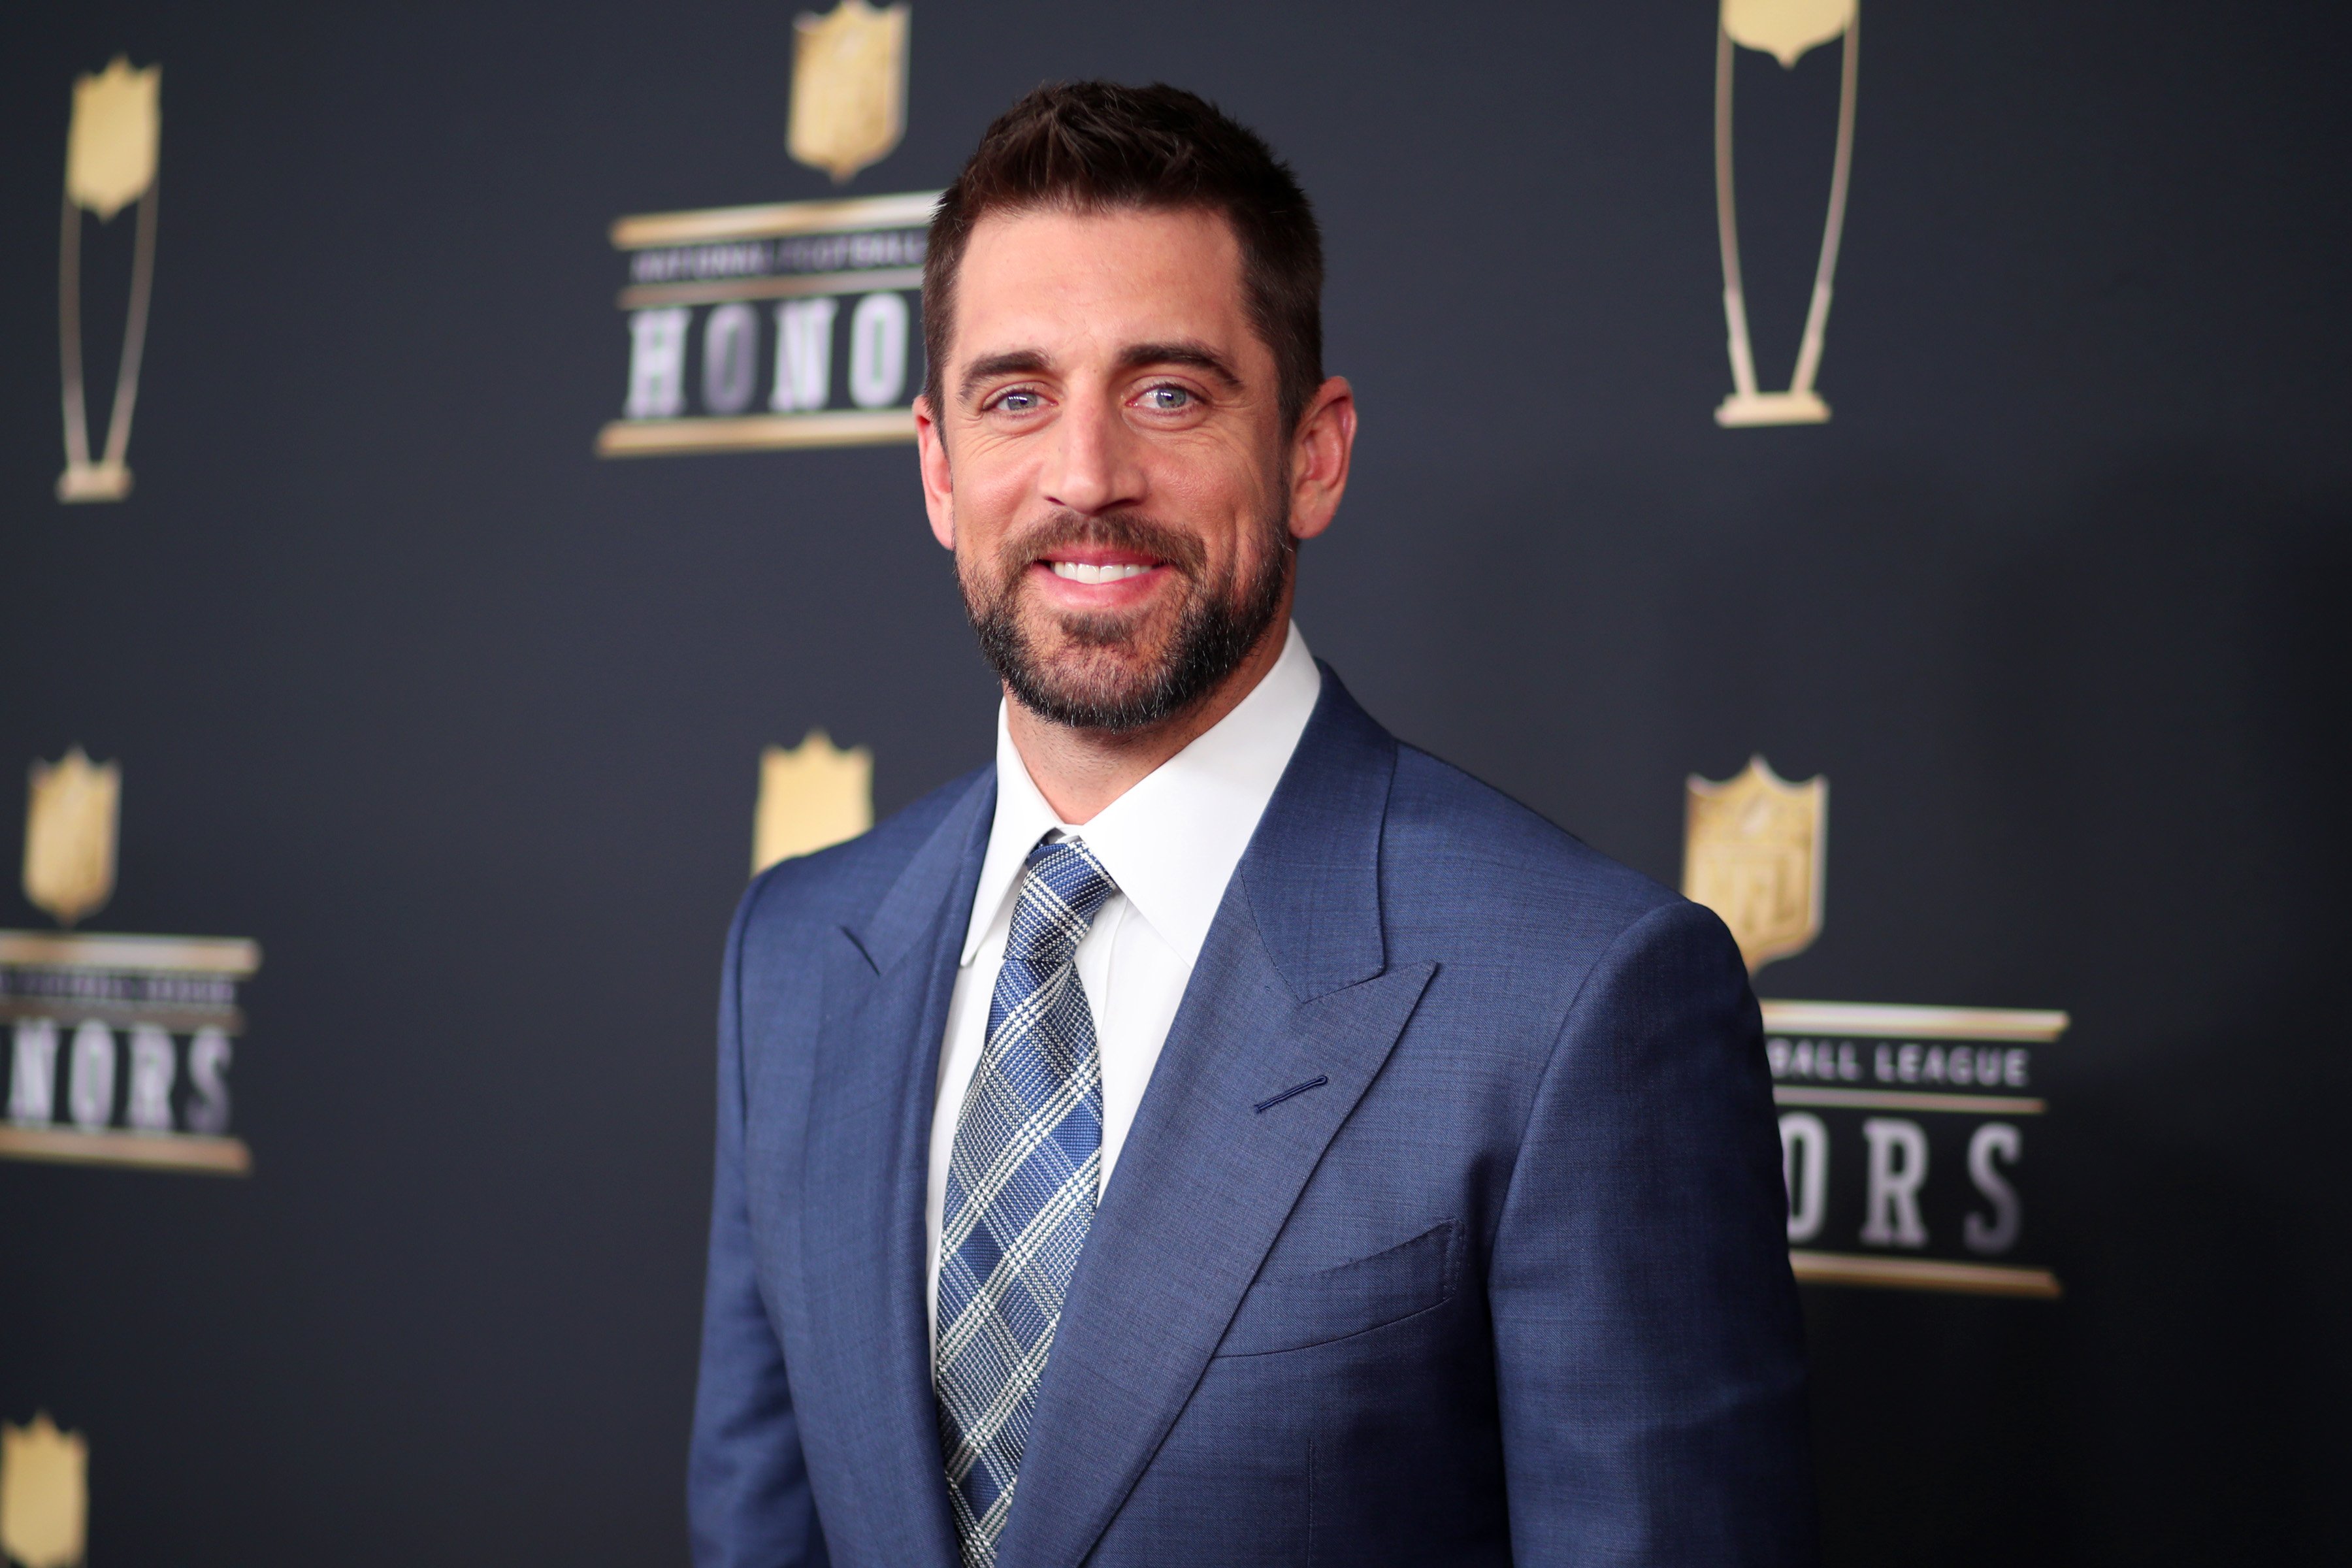 Aaron Rodgers dressed in a blue suit and tie smiling on the red carpet at NFL Honors